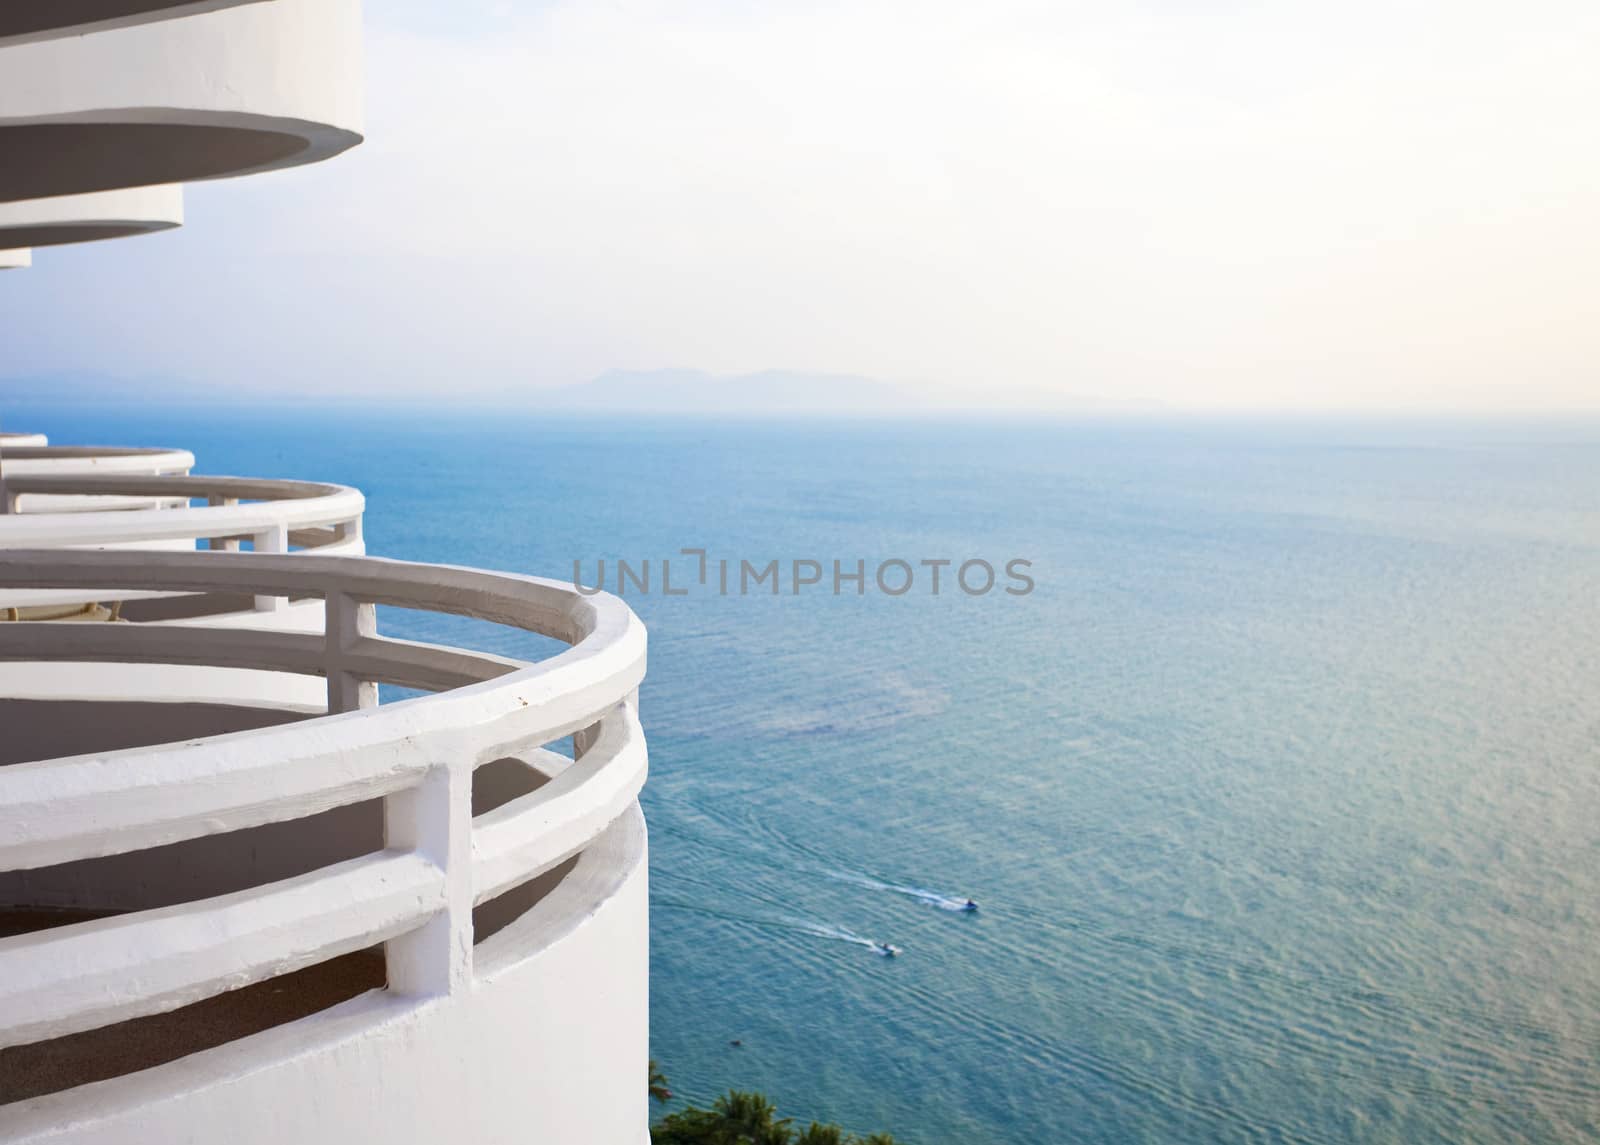 White, curved  balcony looking over beautiful blue ocean